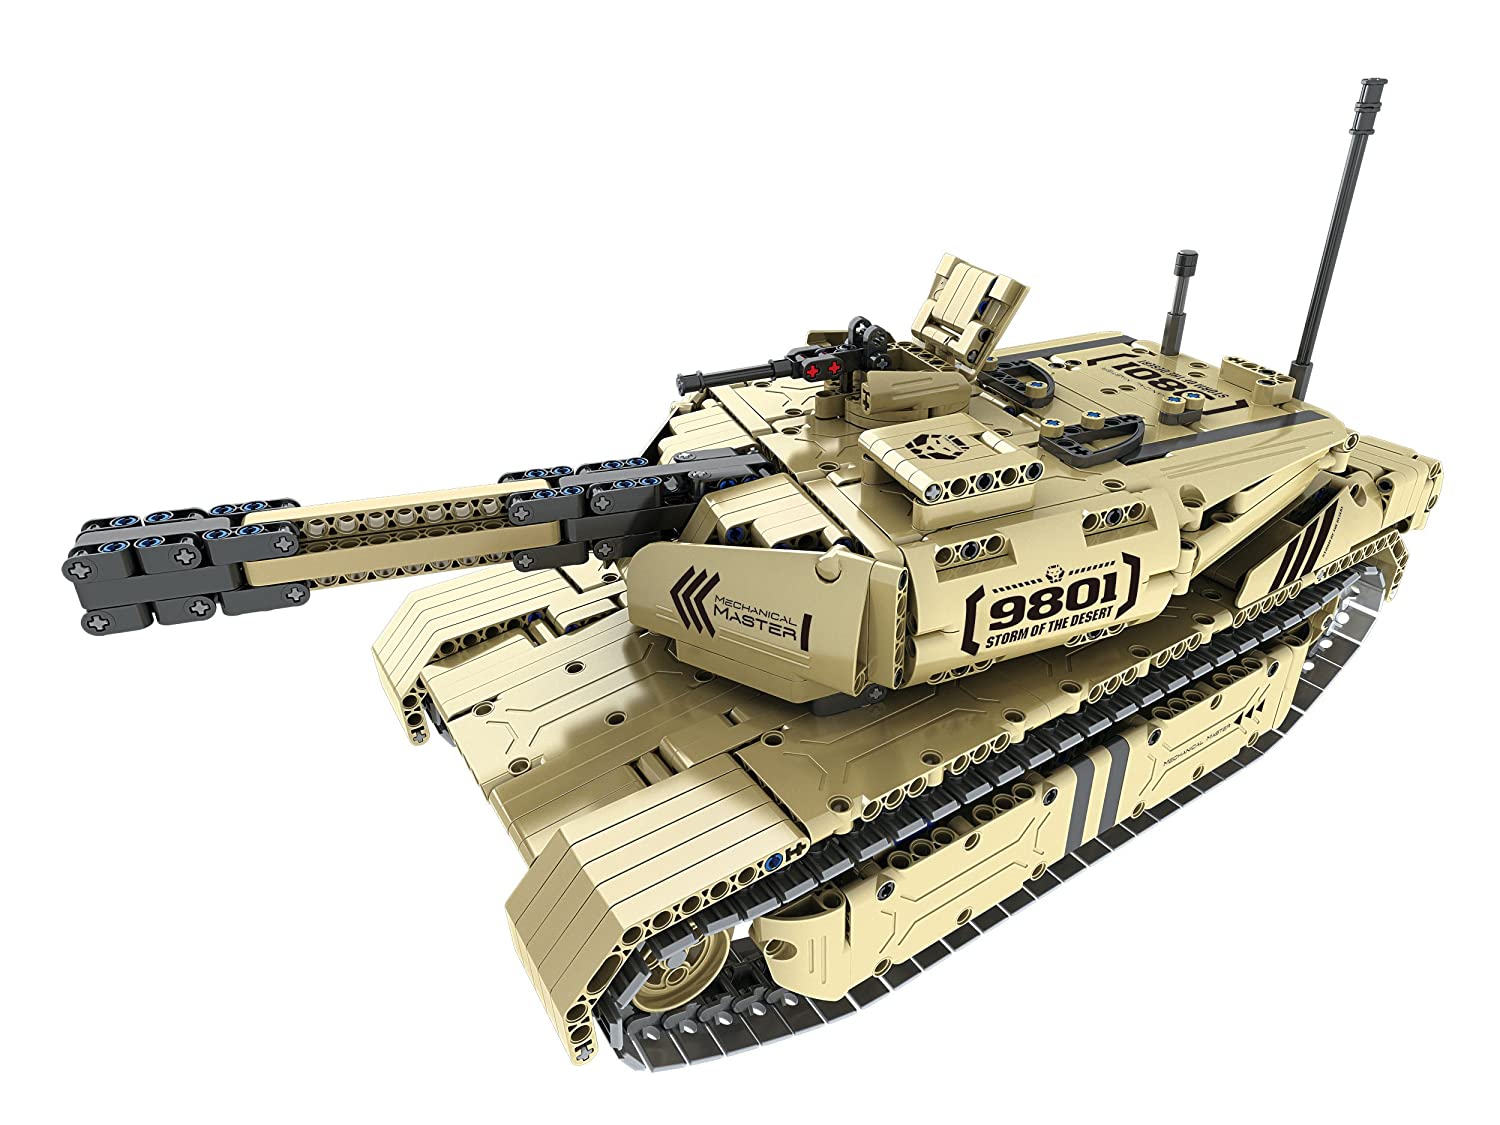 Top 9 Best Remote Control Tanks Battle Reviews in 2022 8